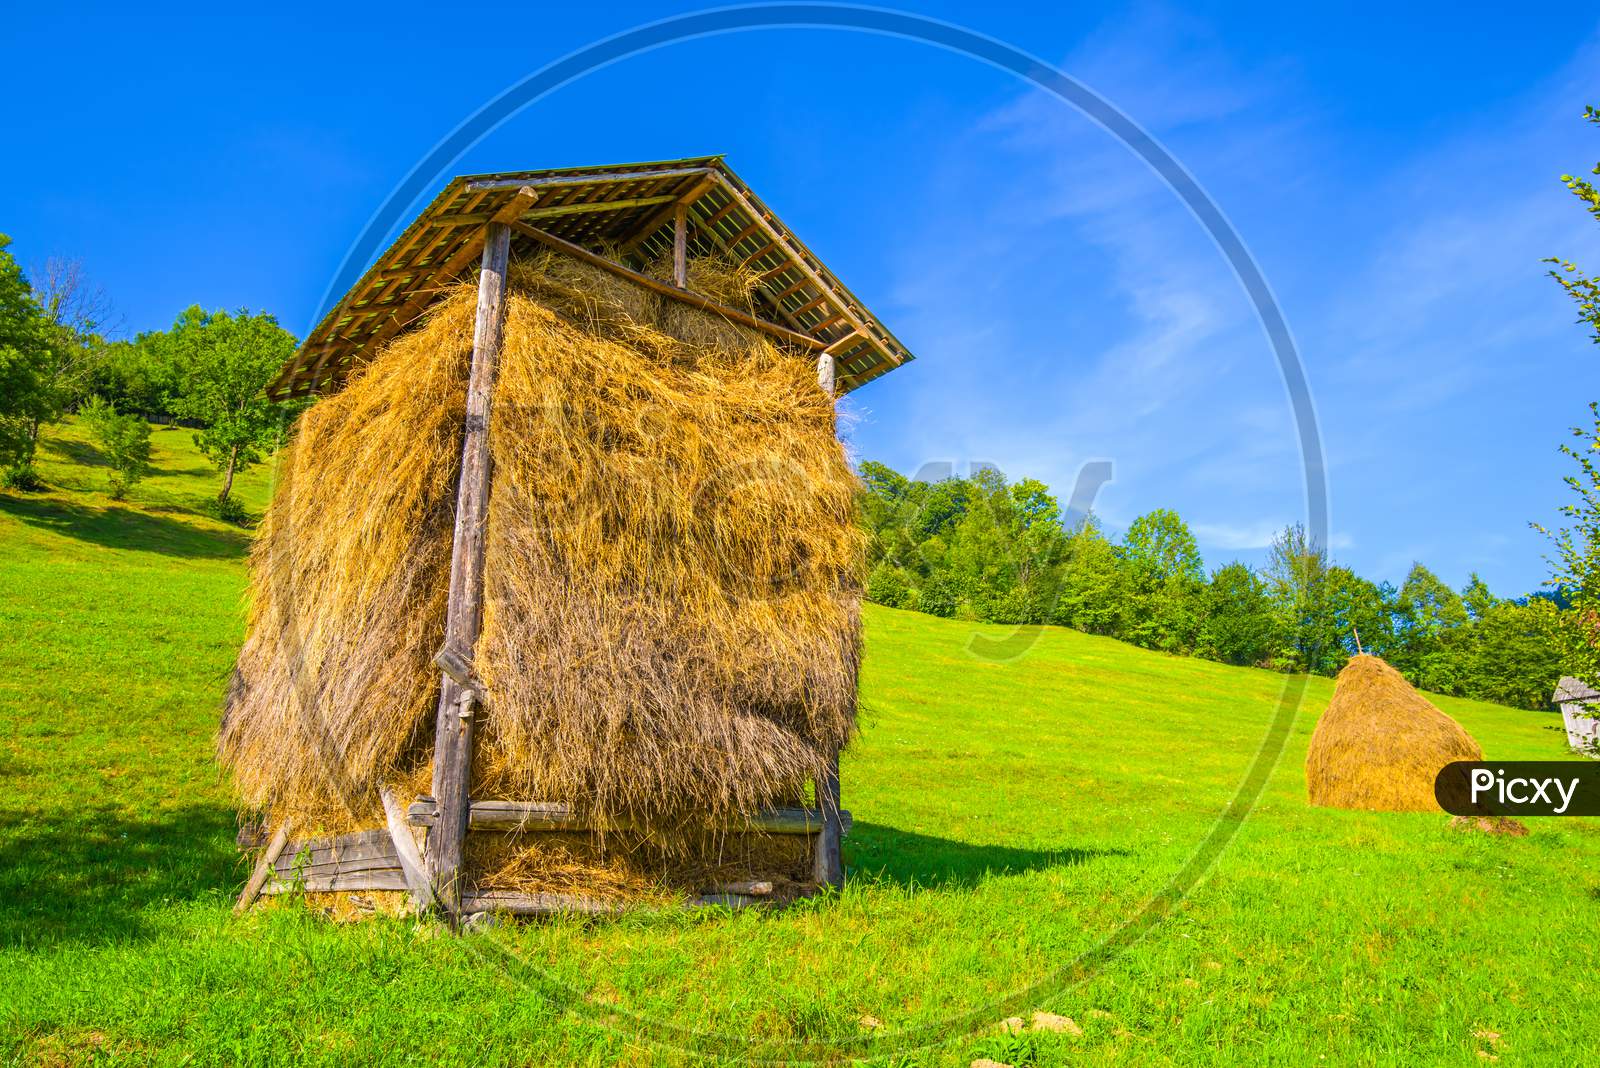 Hay Stack Under A Canopy